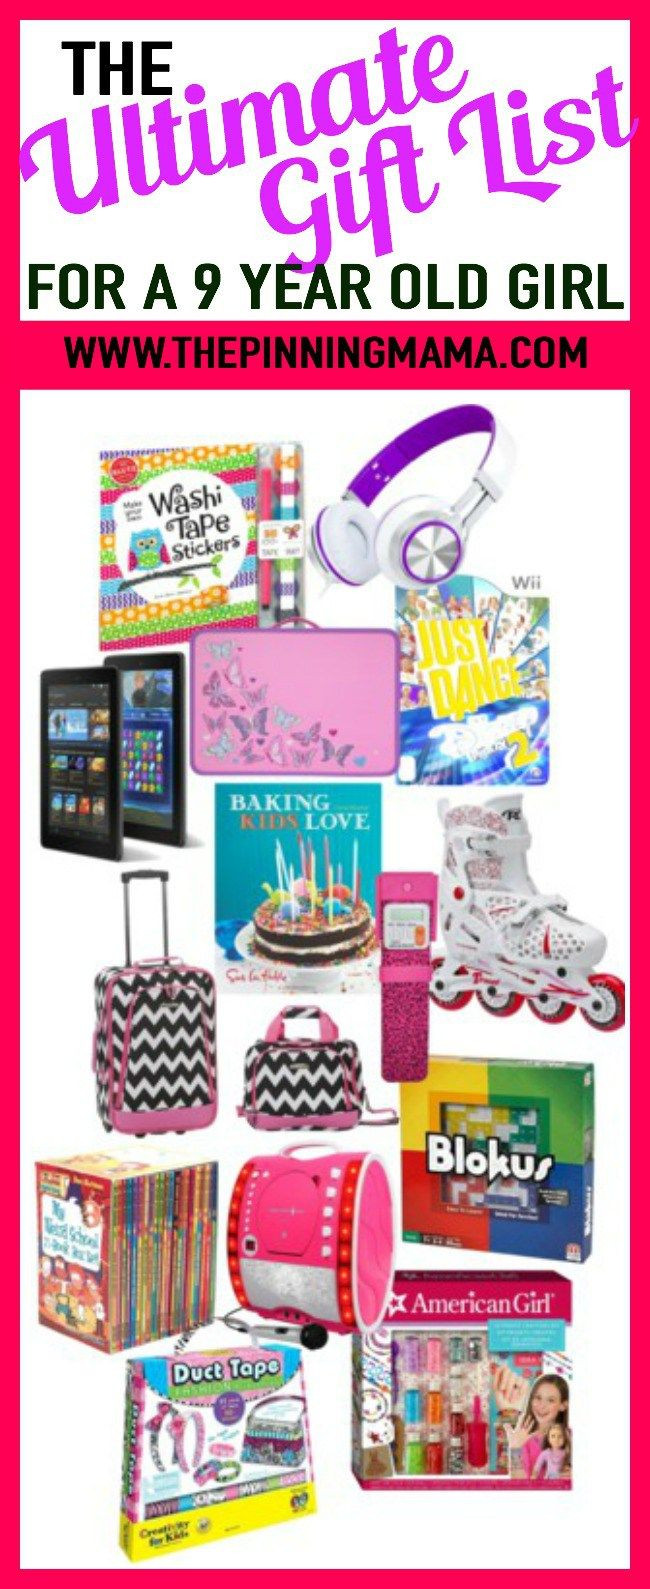 Girls Gift Ideas Age 9
 The ultimate list of t ideas for a 9 year old girl see